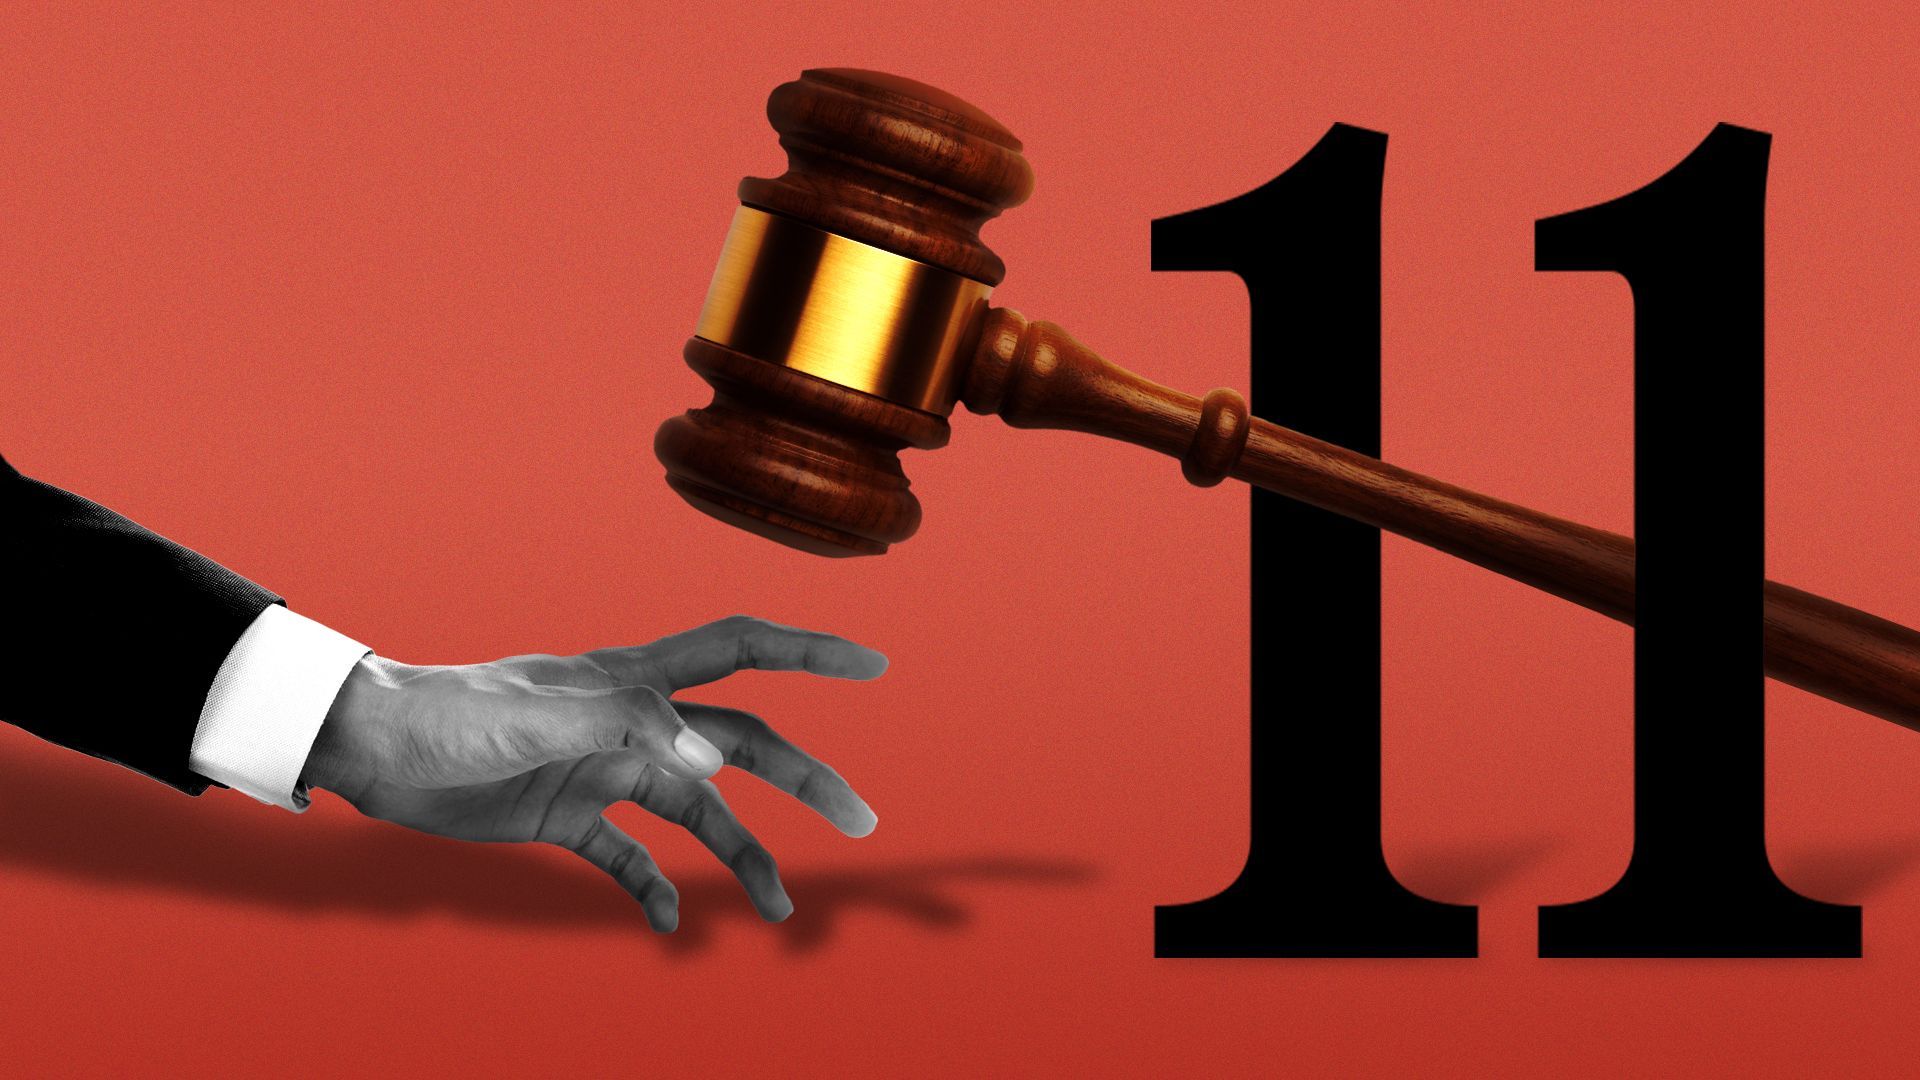 Illustration of a gavel about to come down on a hand that is reaching for a large number eleven.